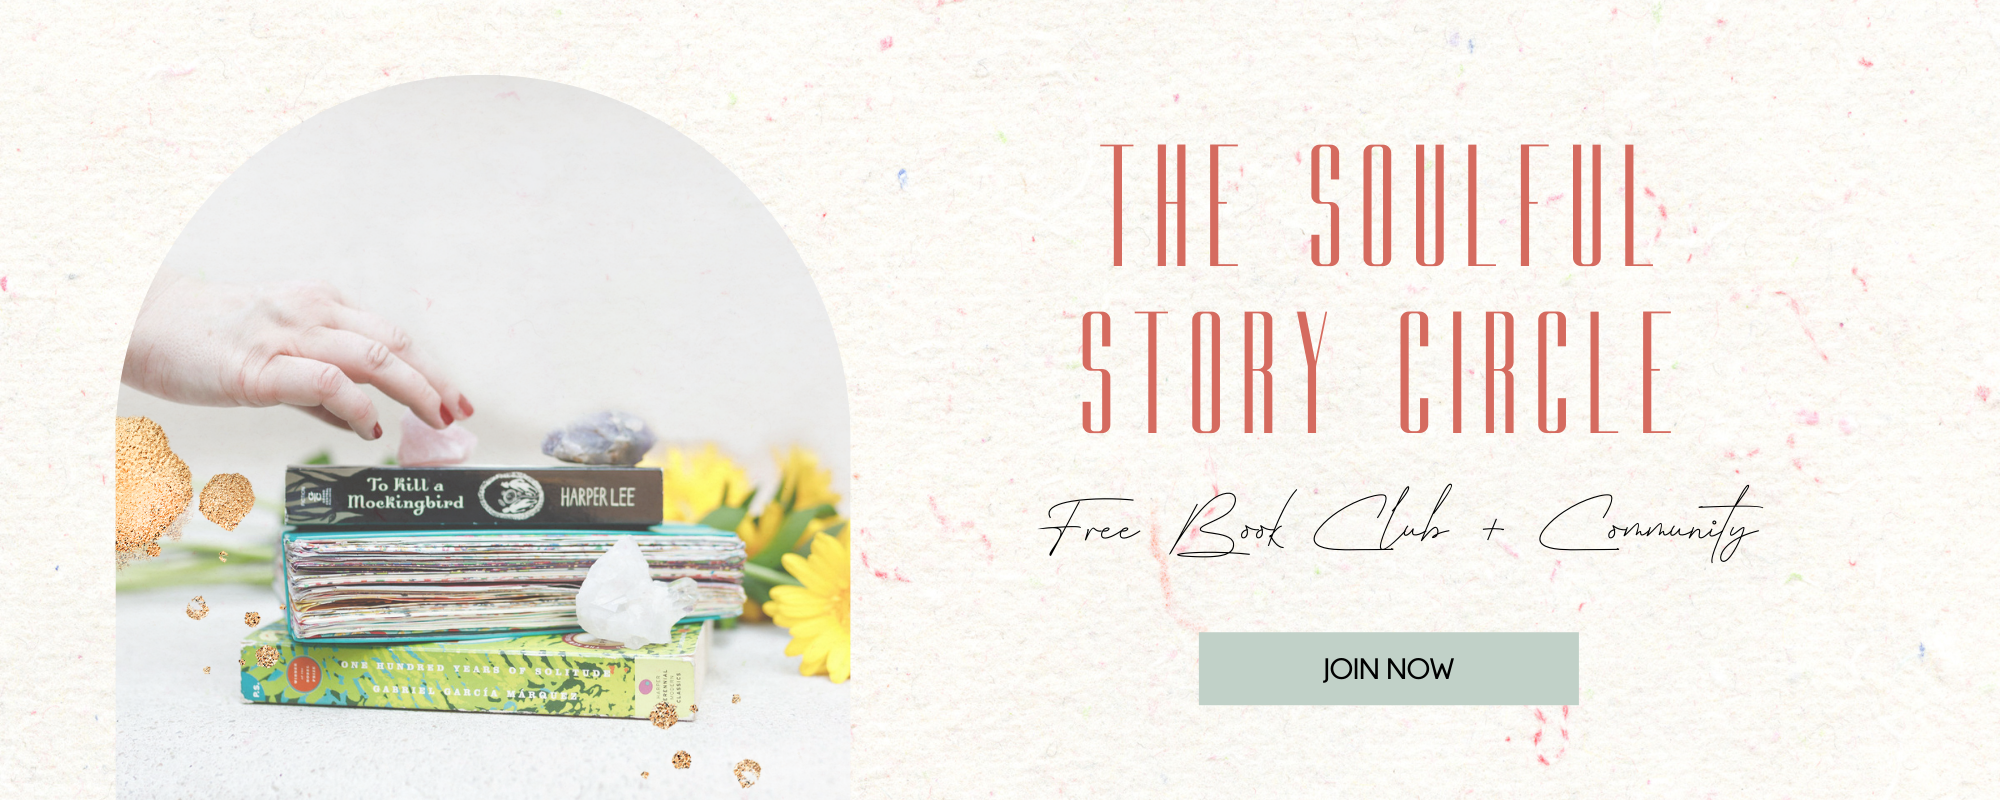 The Soulful Story Circle Free Book Club With Lauren Osselton Copywriter